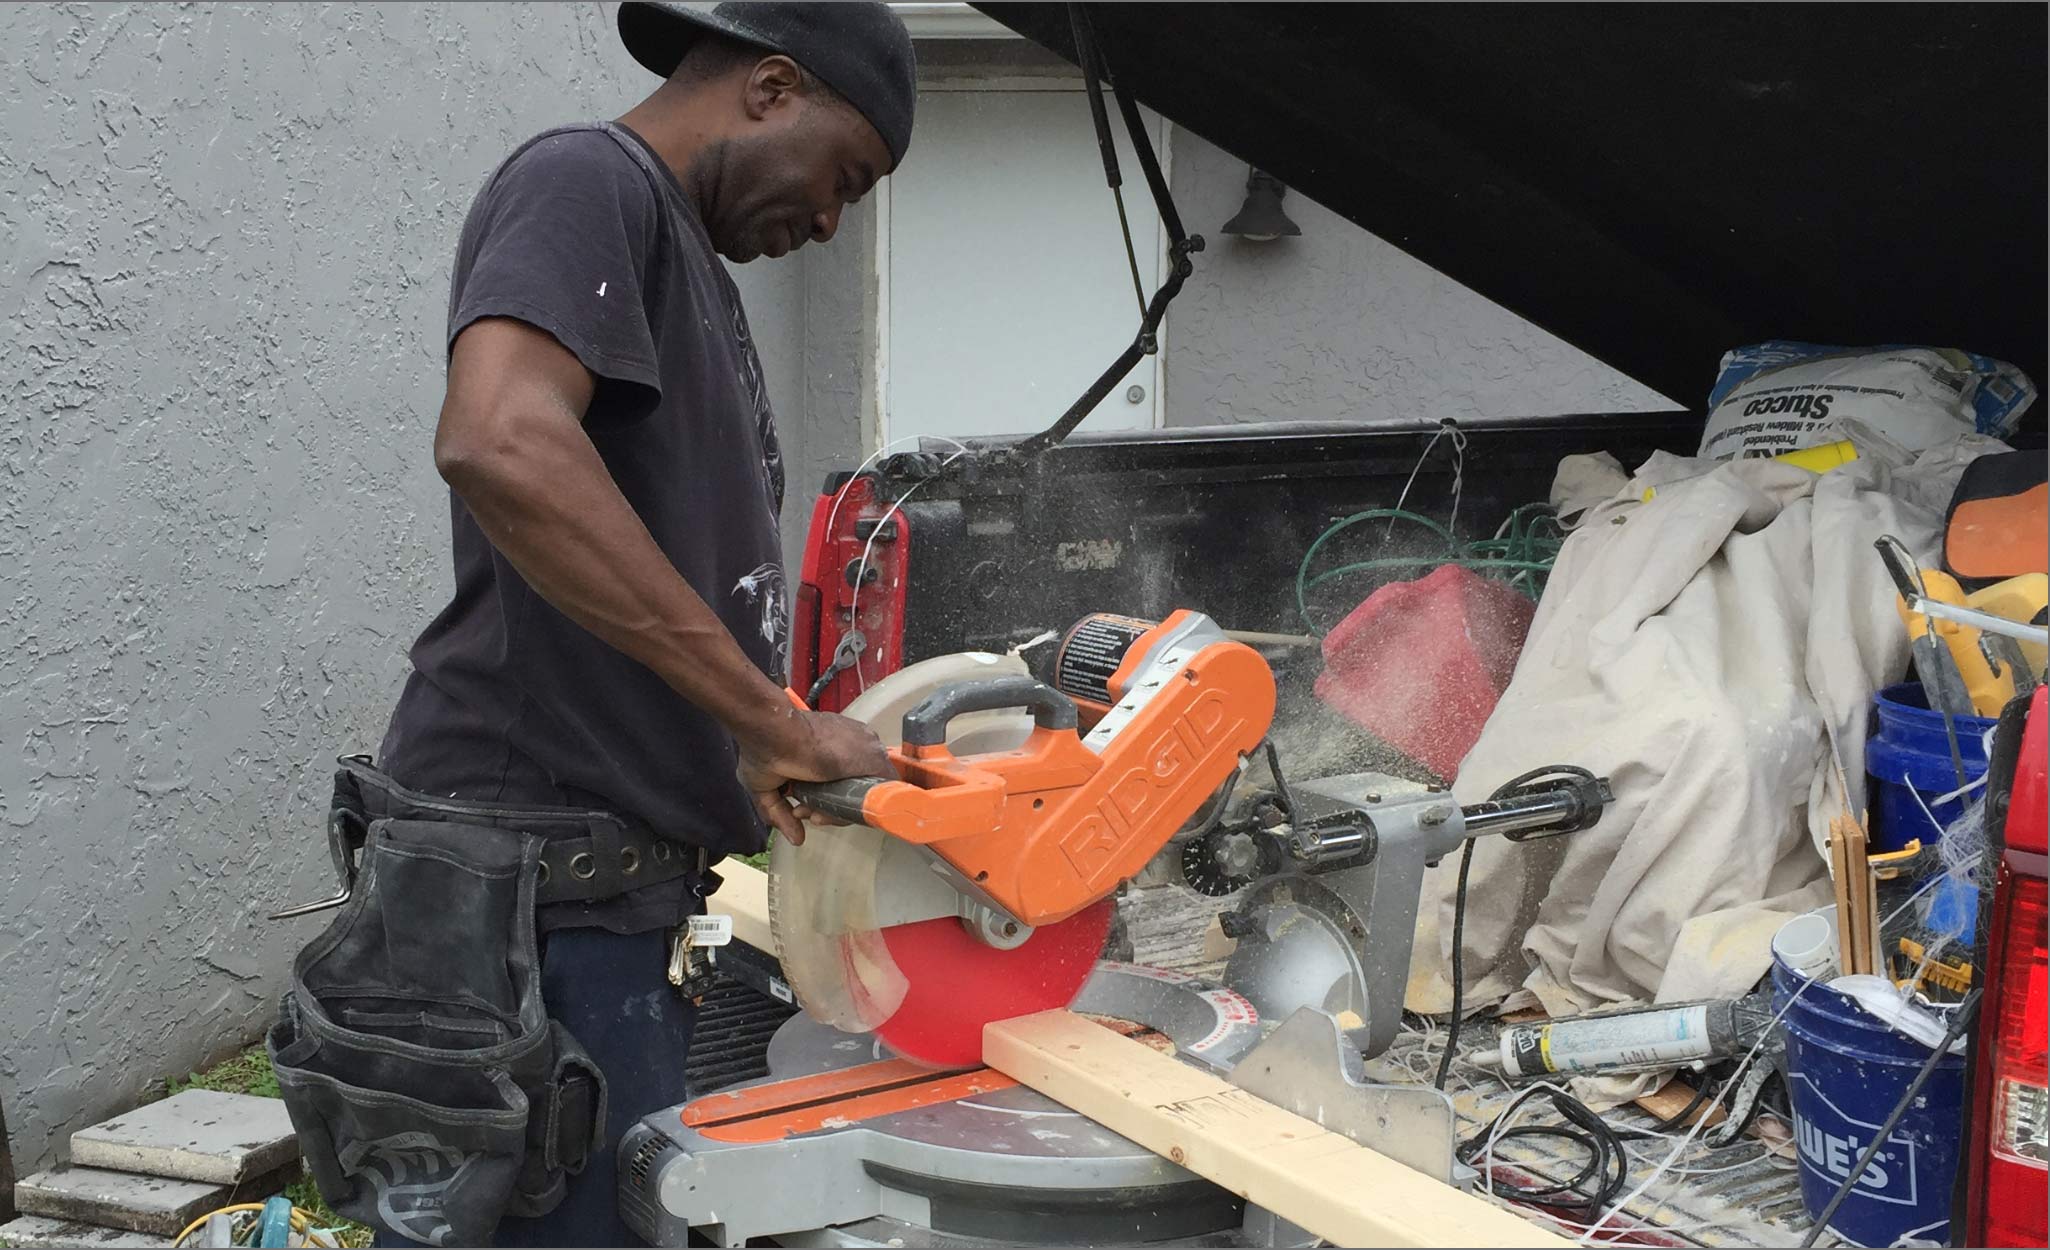 A man cuts a board at the back of a truck.